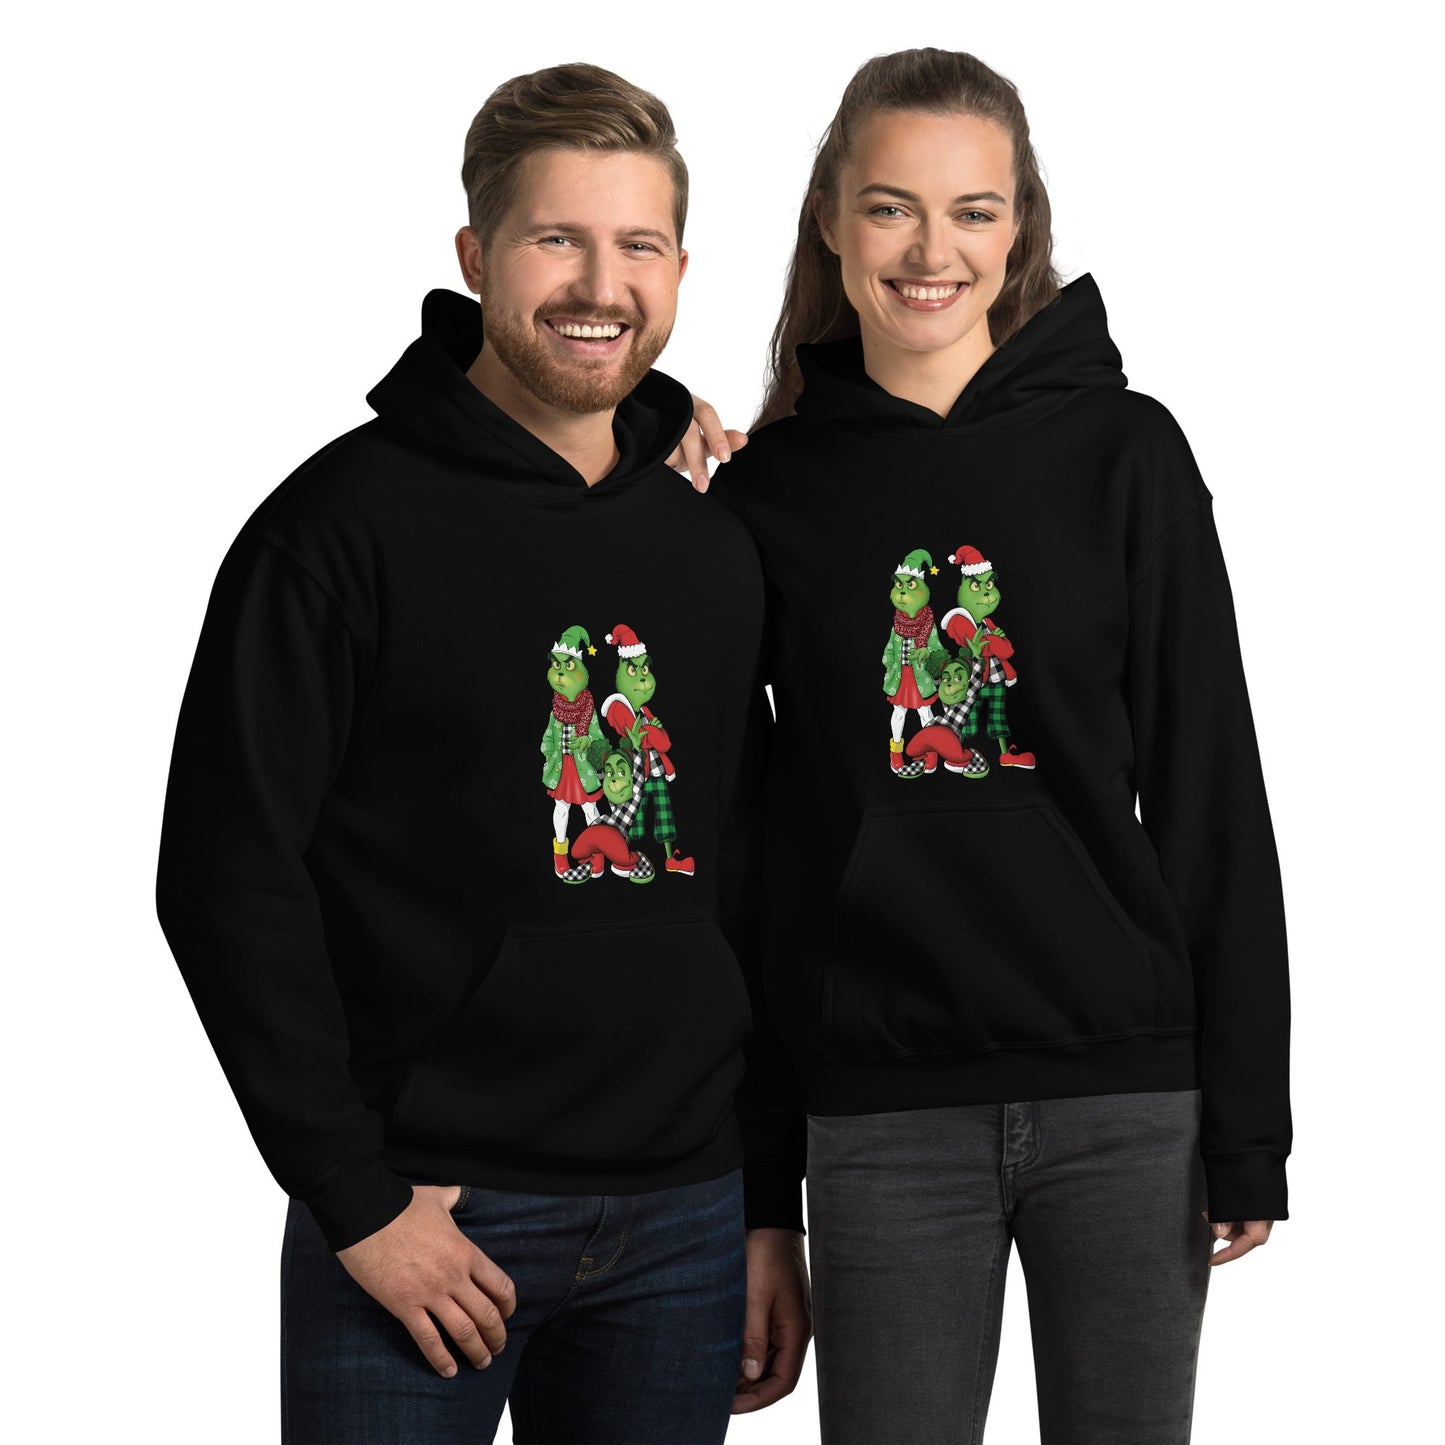 The Grinch and Family Christmas Unisex Hoodie - smuniqueshirts